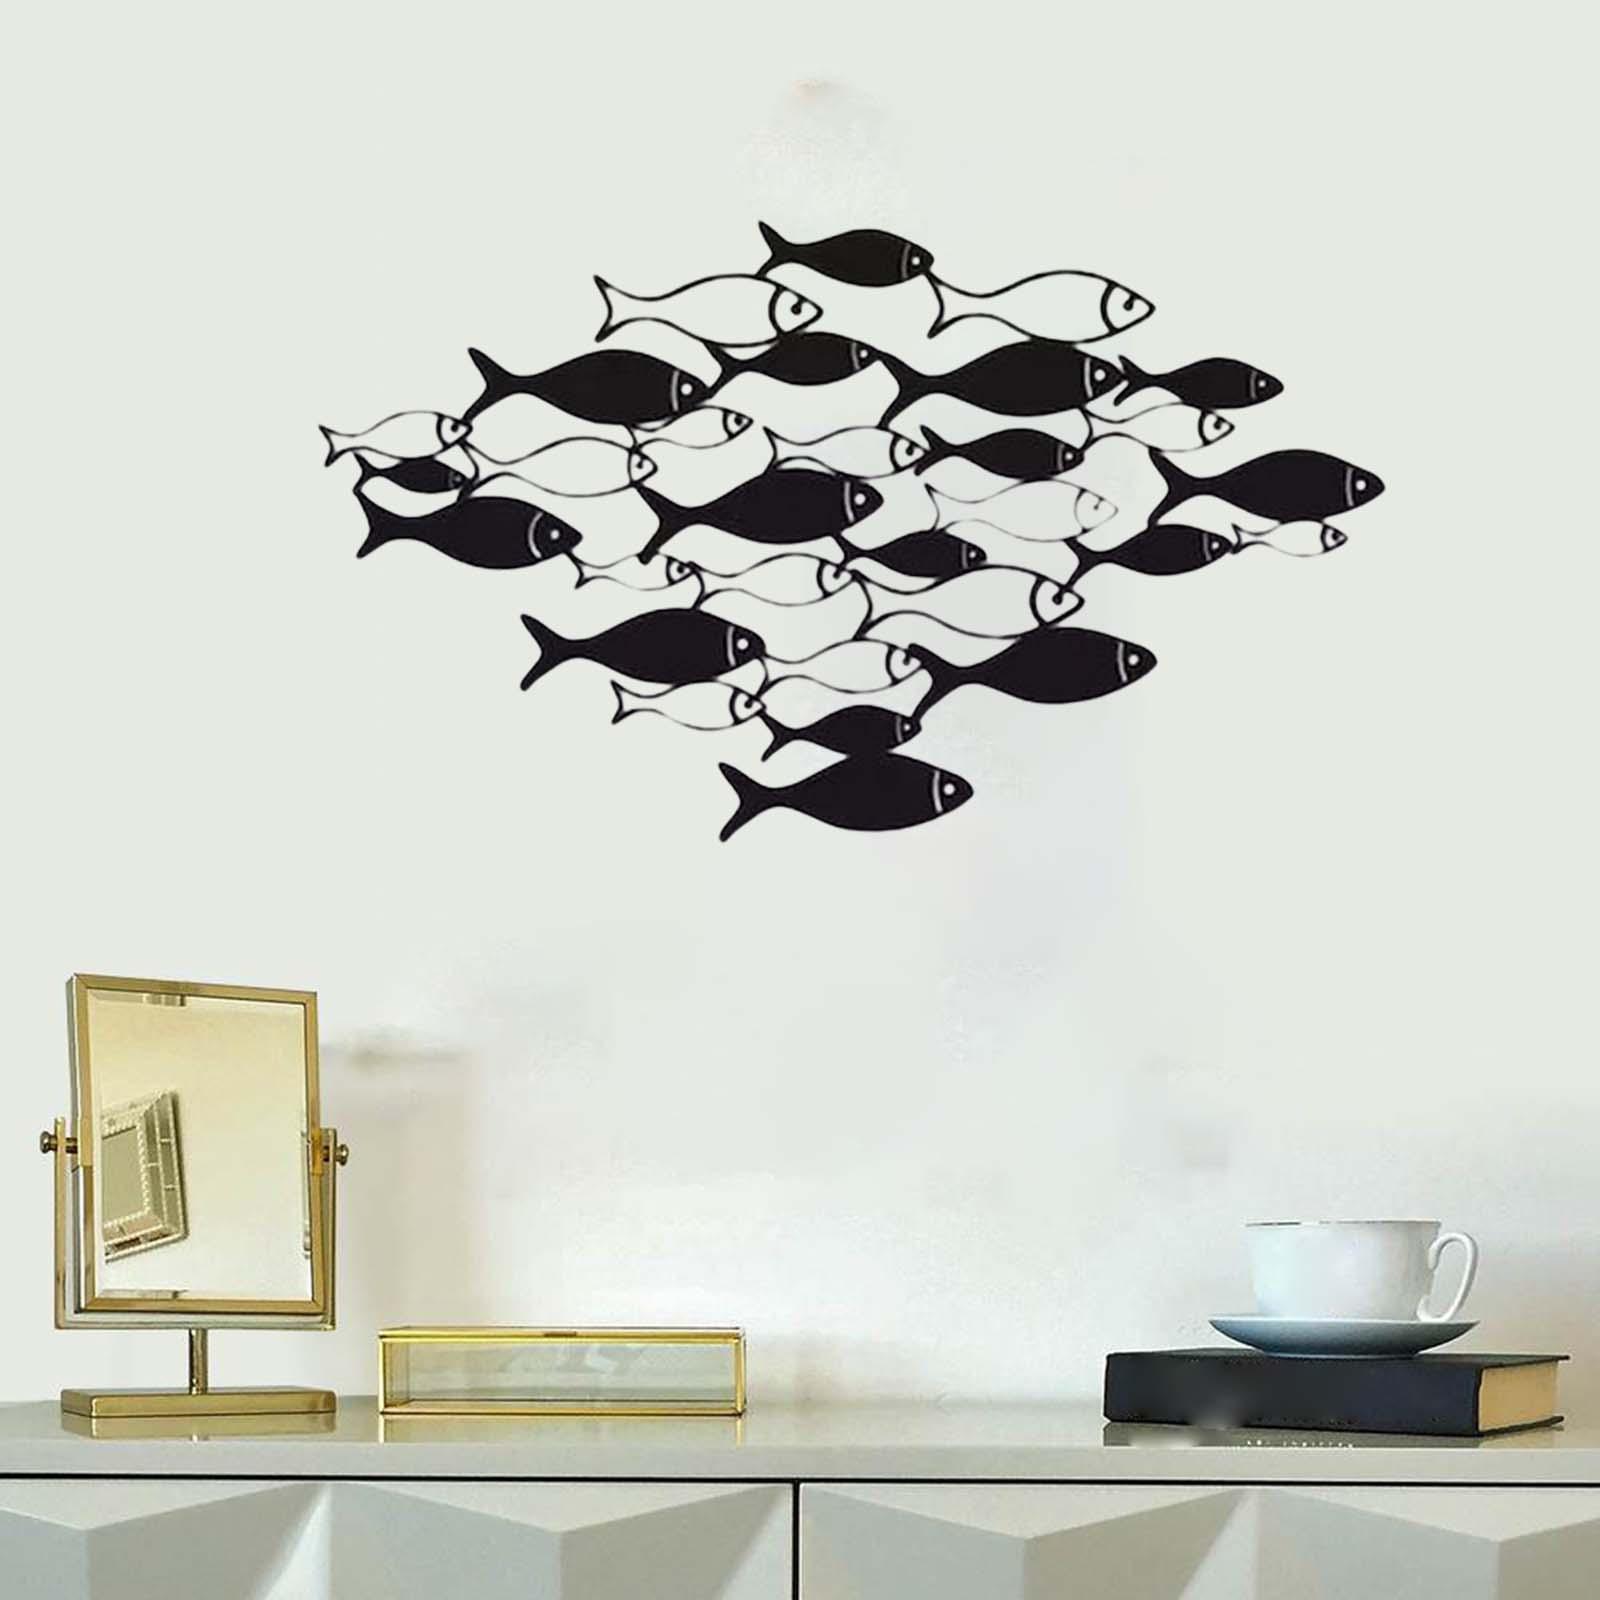 Fish Wall Decor Wall Sculpture Hanging Creative for Office Dining Rooms Wall 40cmx23cm